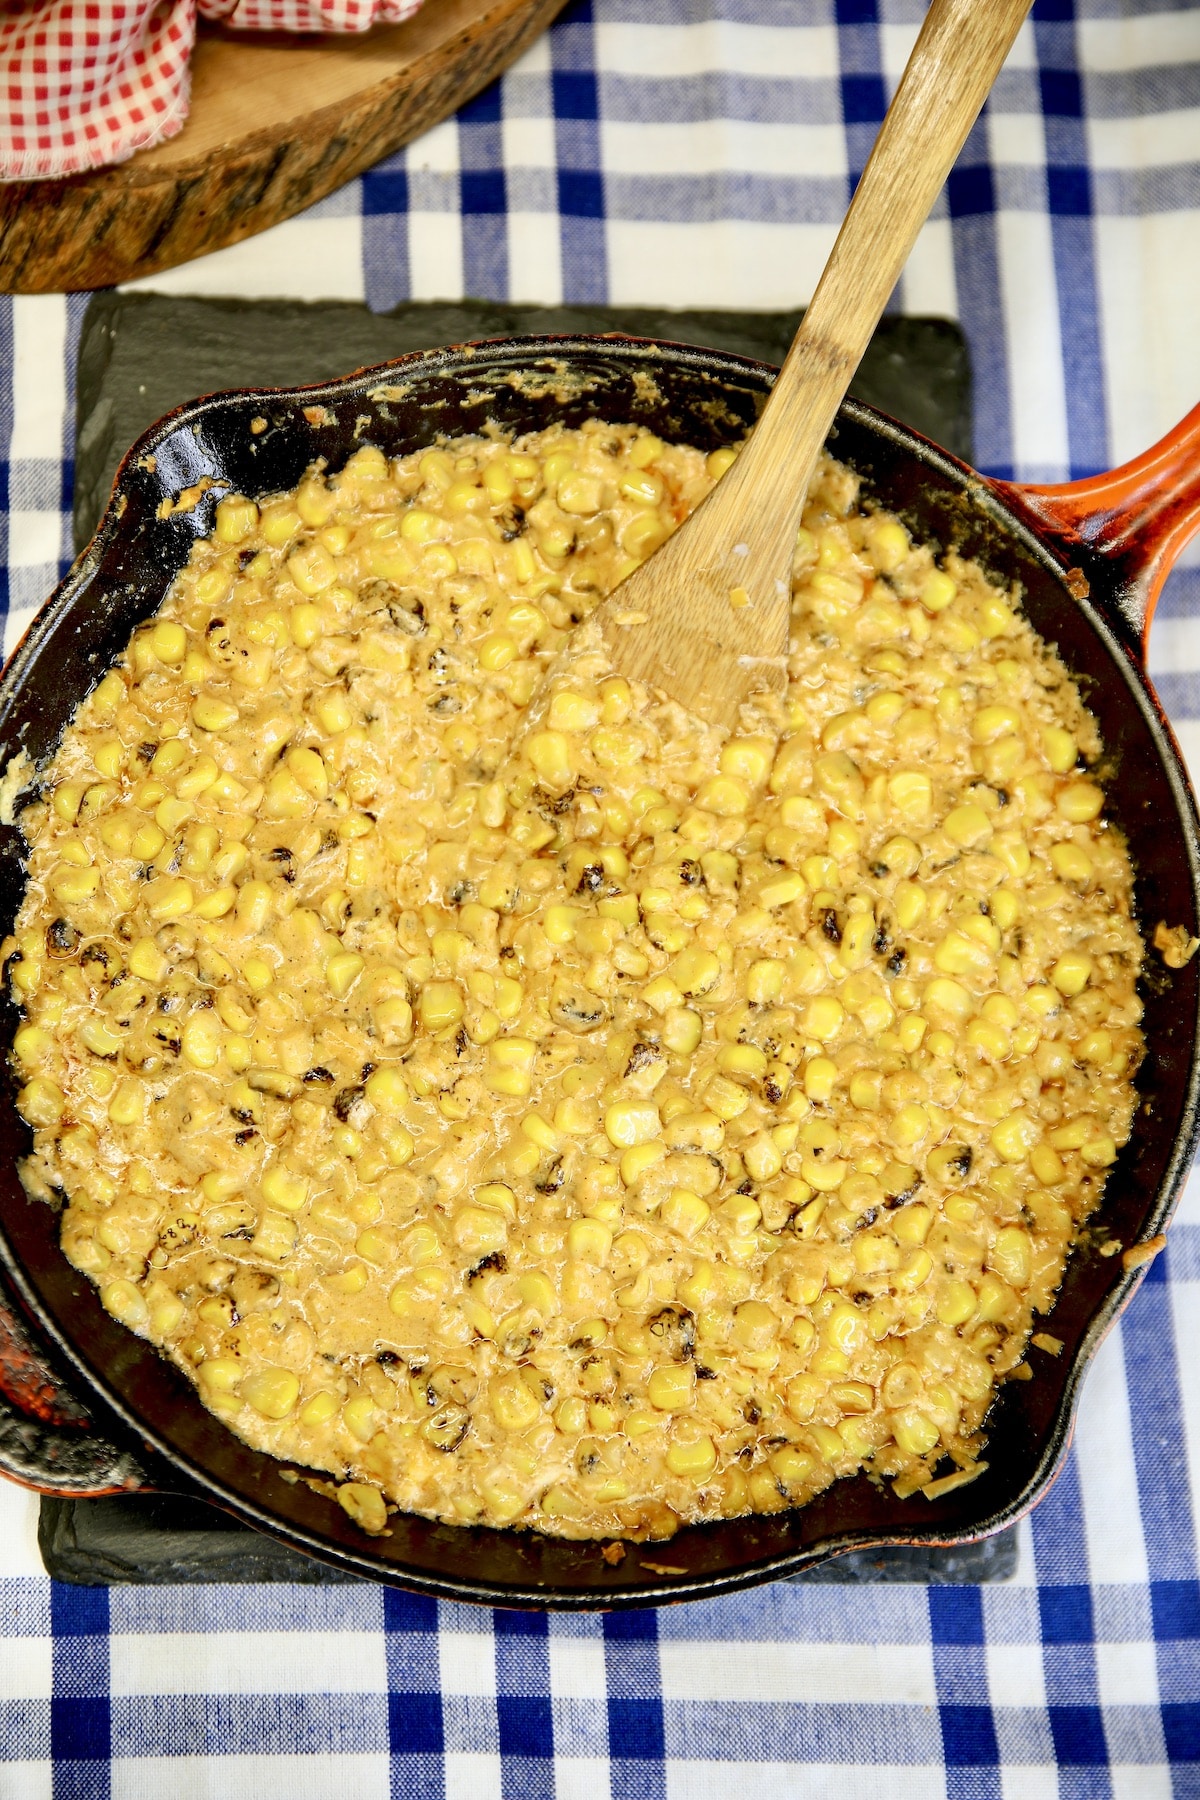 Skillet of creamed corn with a wood spoon.